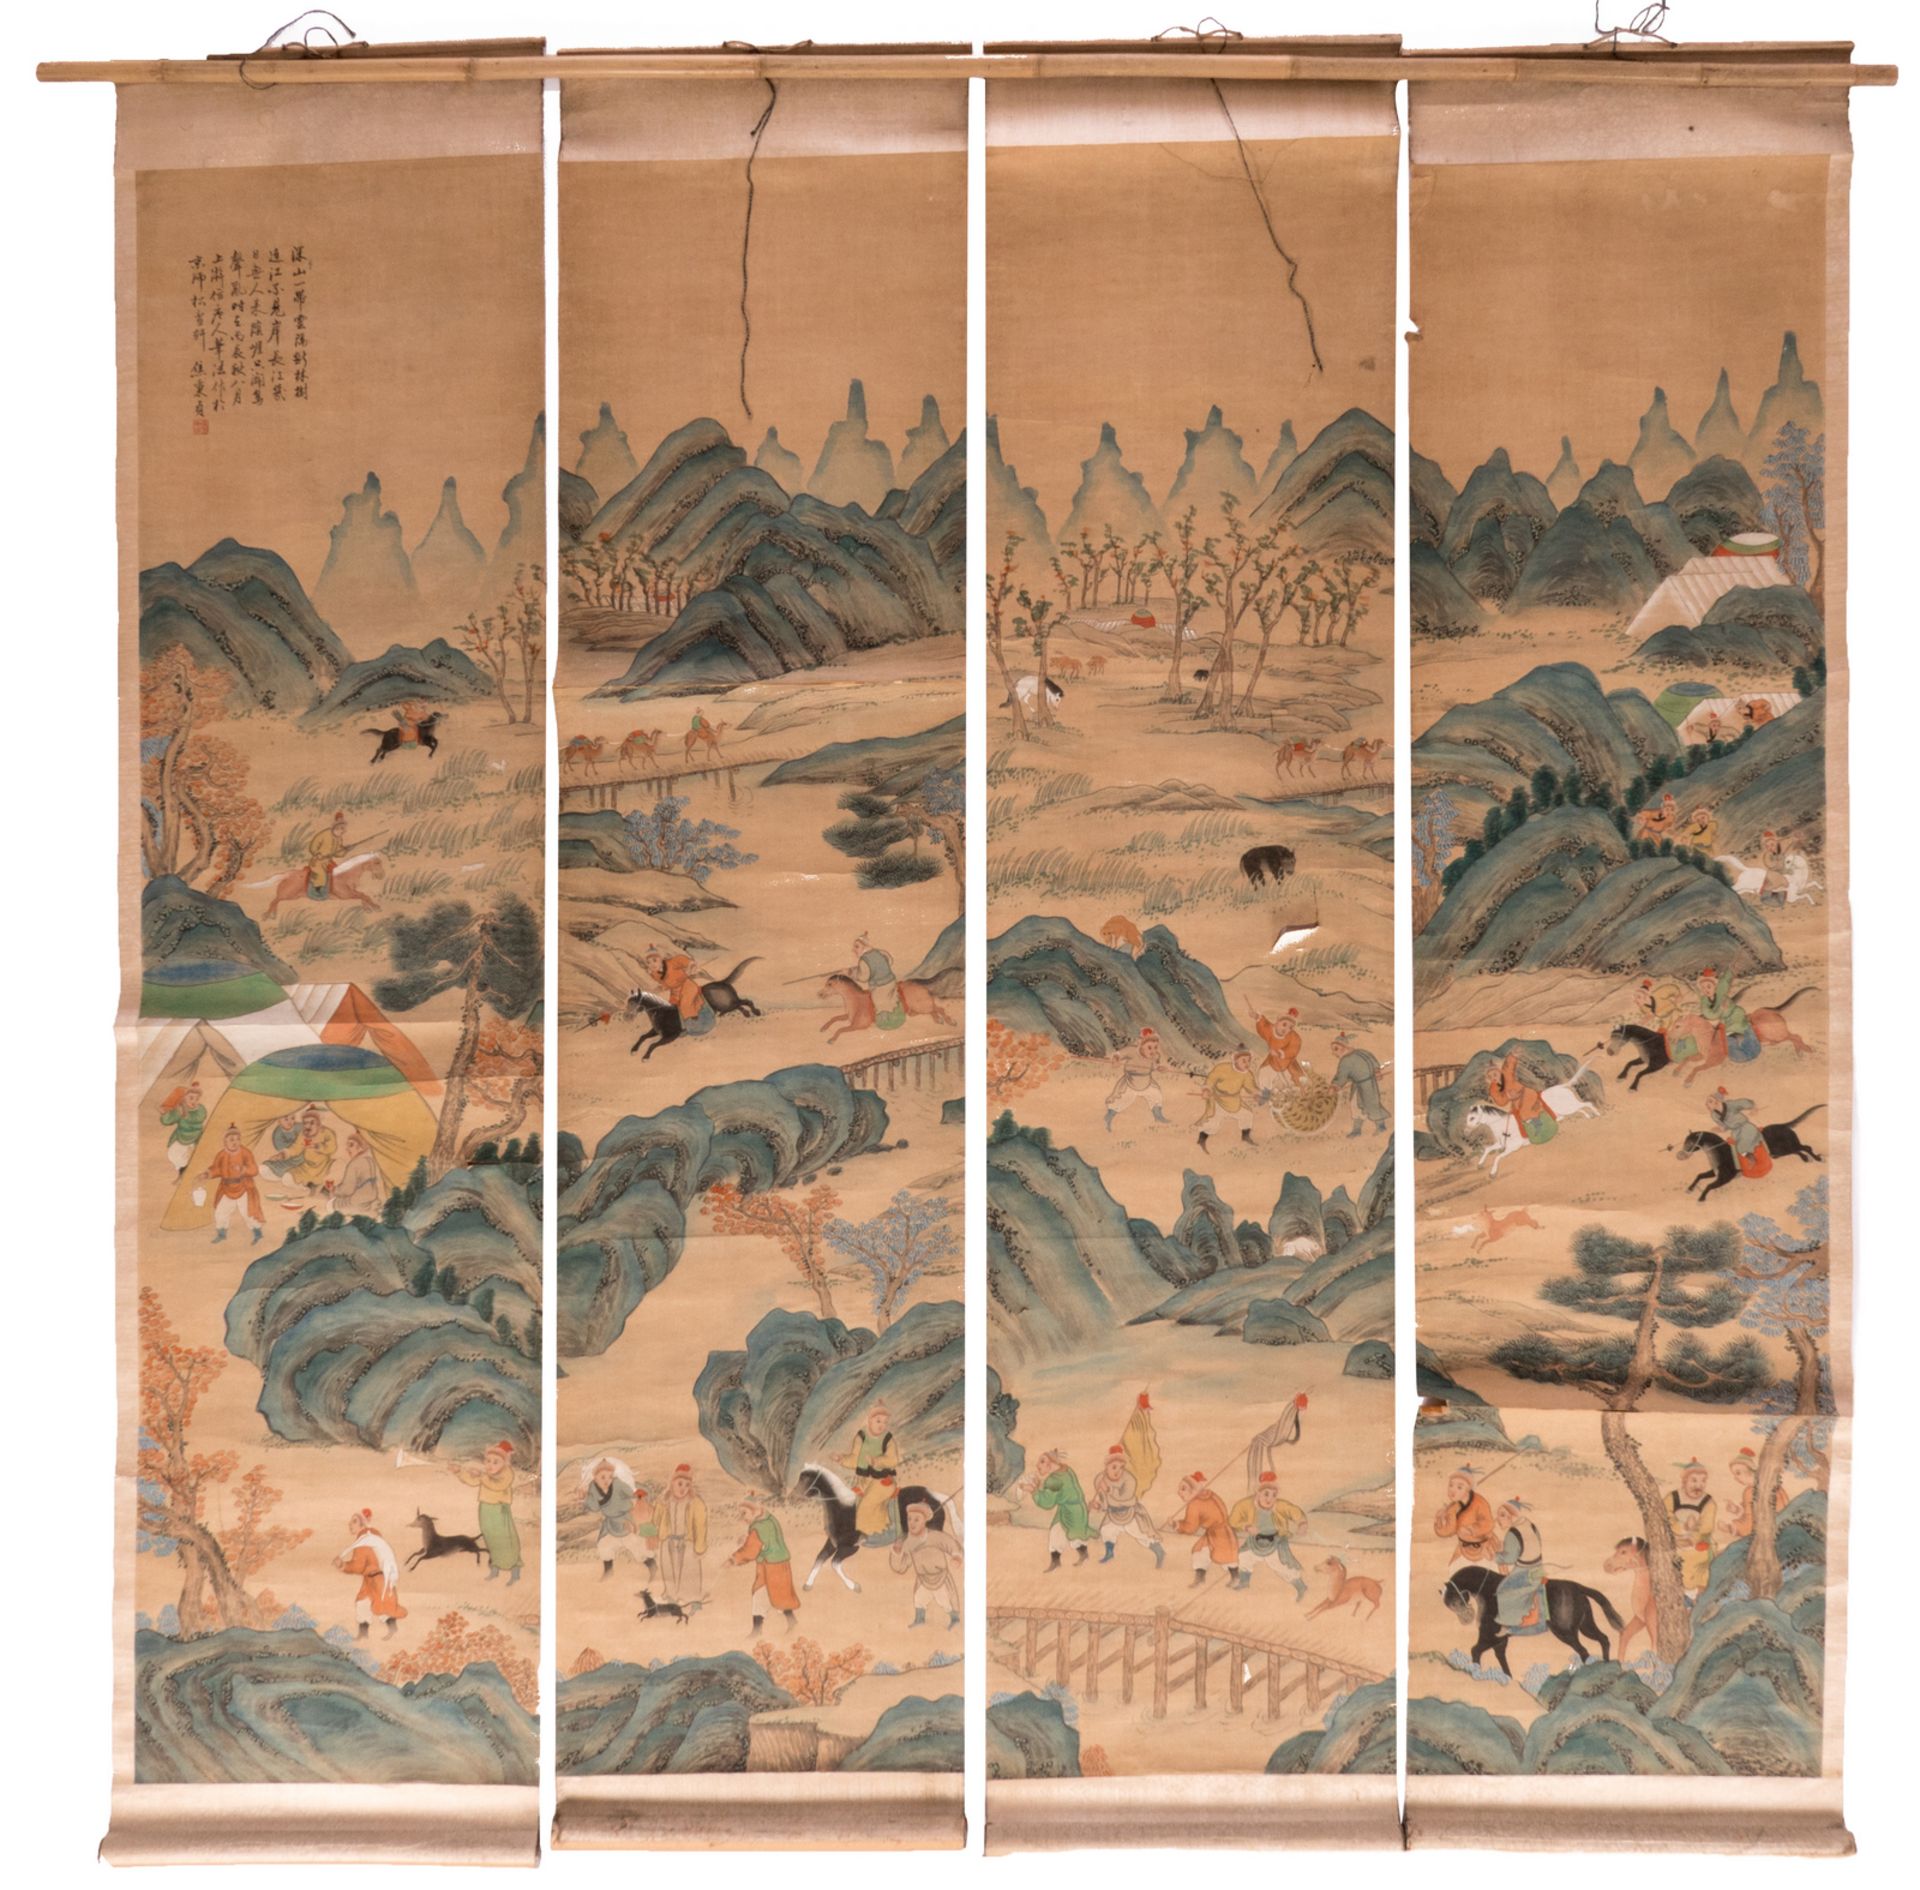 A Chinese scroll depicting Mongolian riders and travellers in a mountainous landscape, 19thC, the